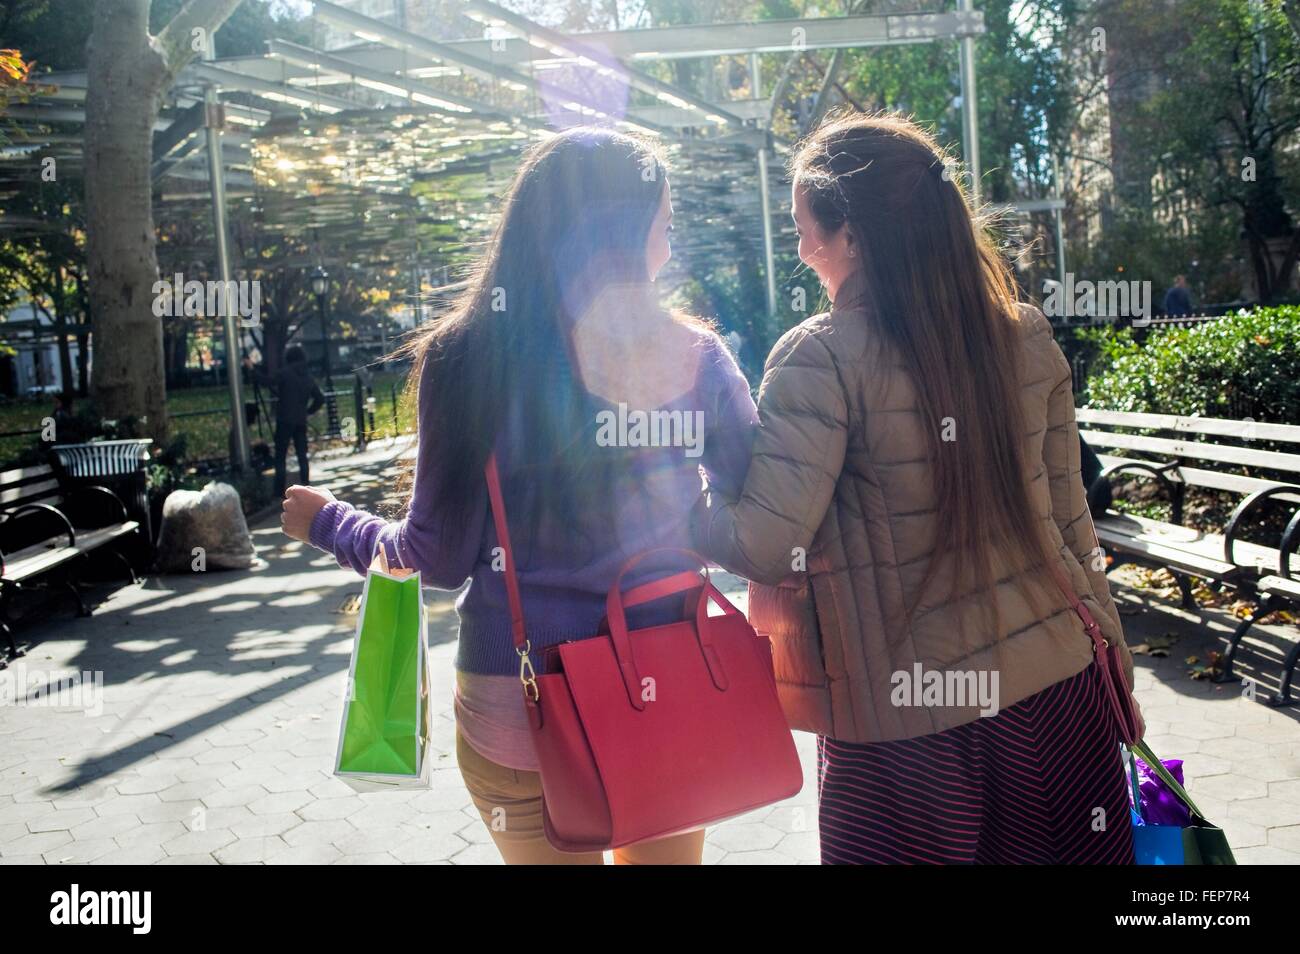 Rear view of young female adult twins strolling in park with shopping bags Stock Photo